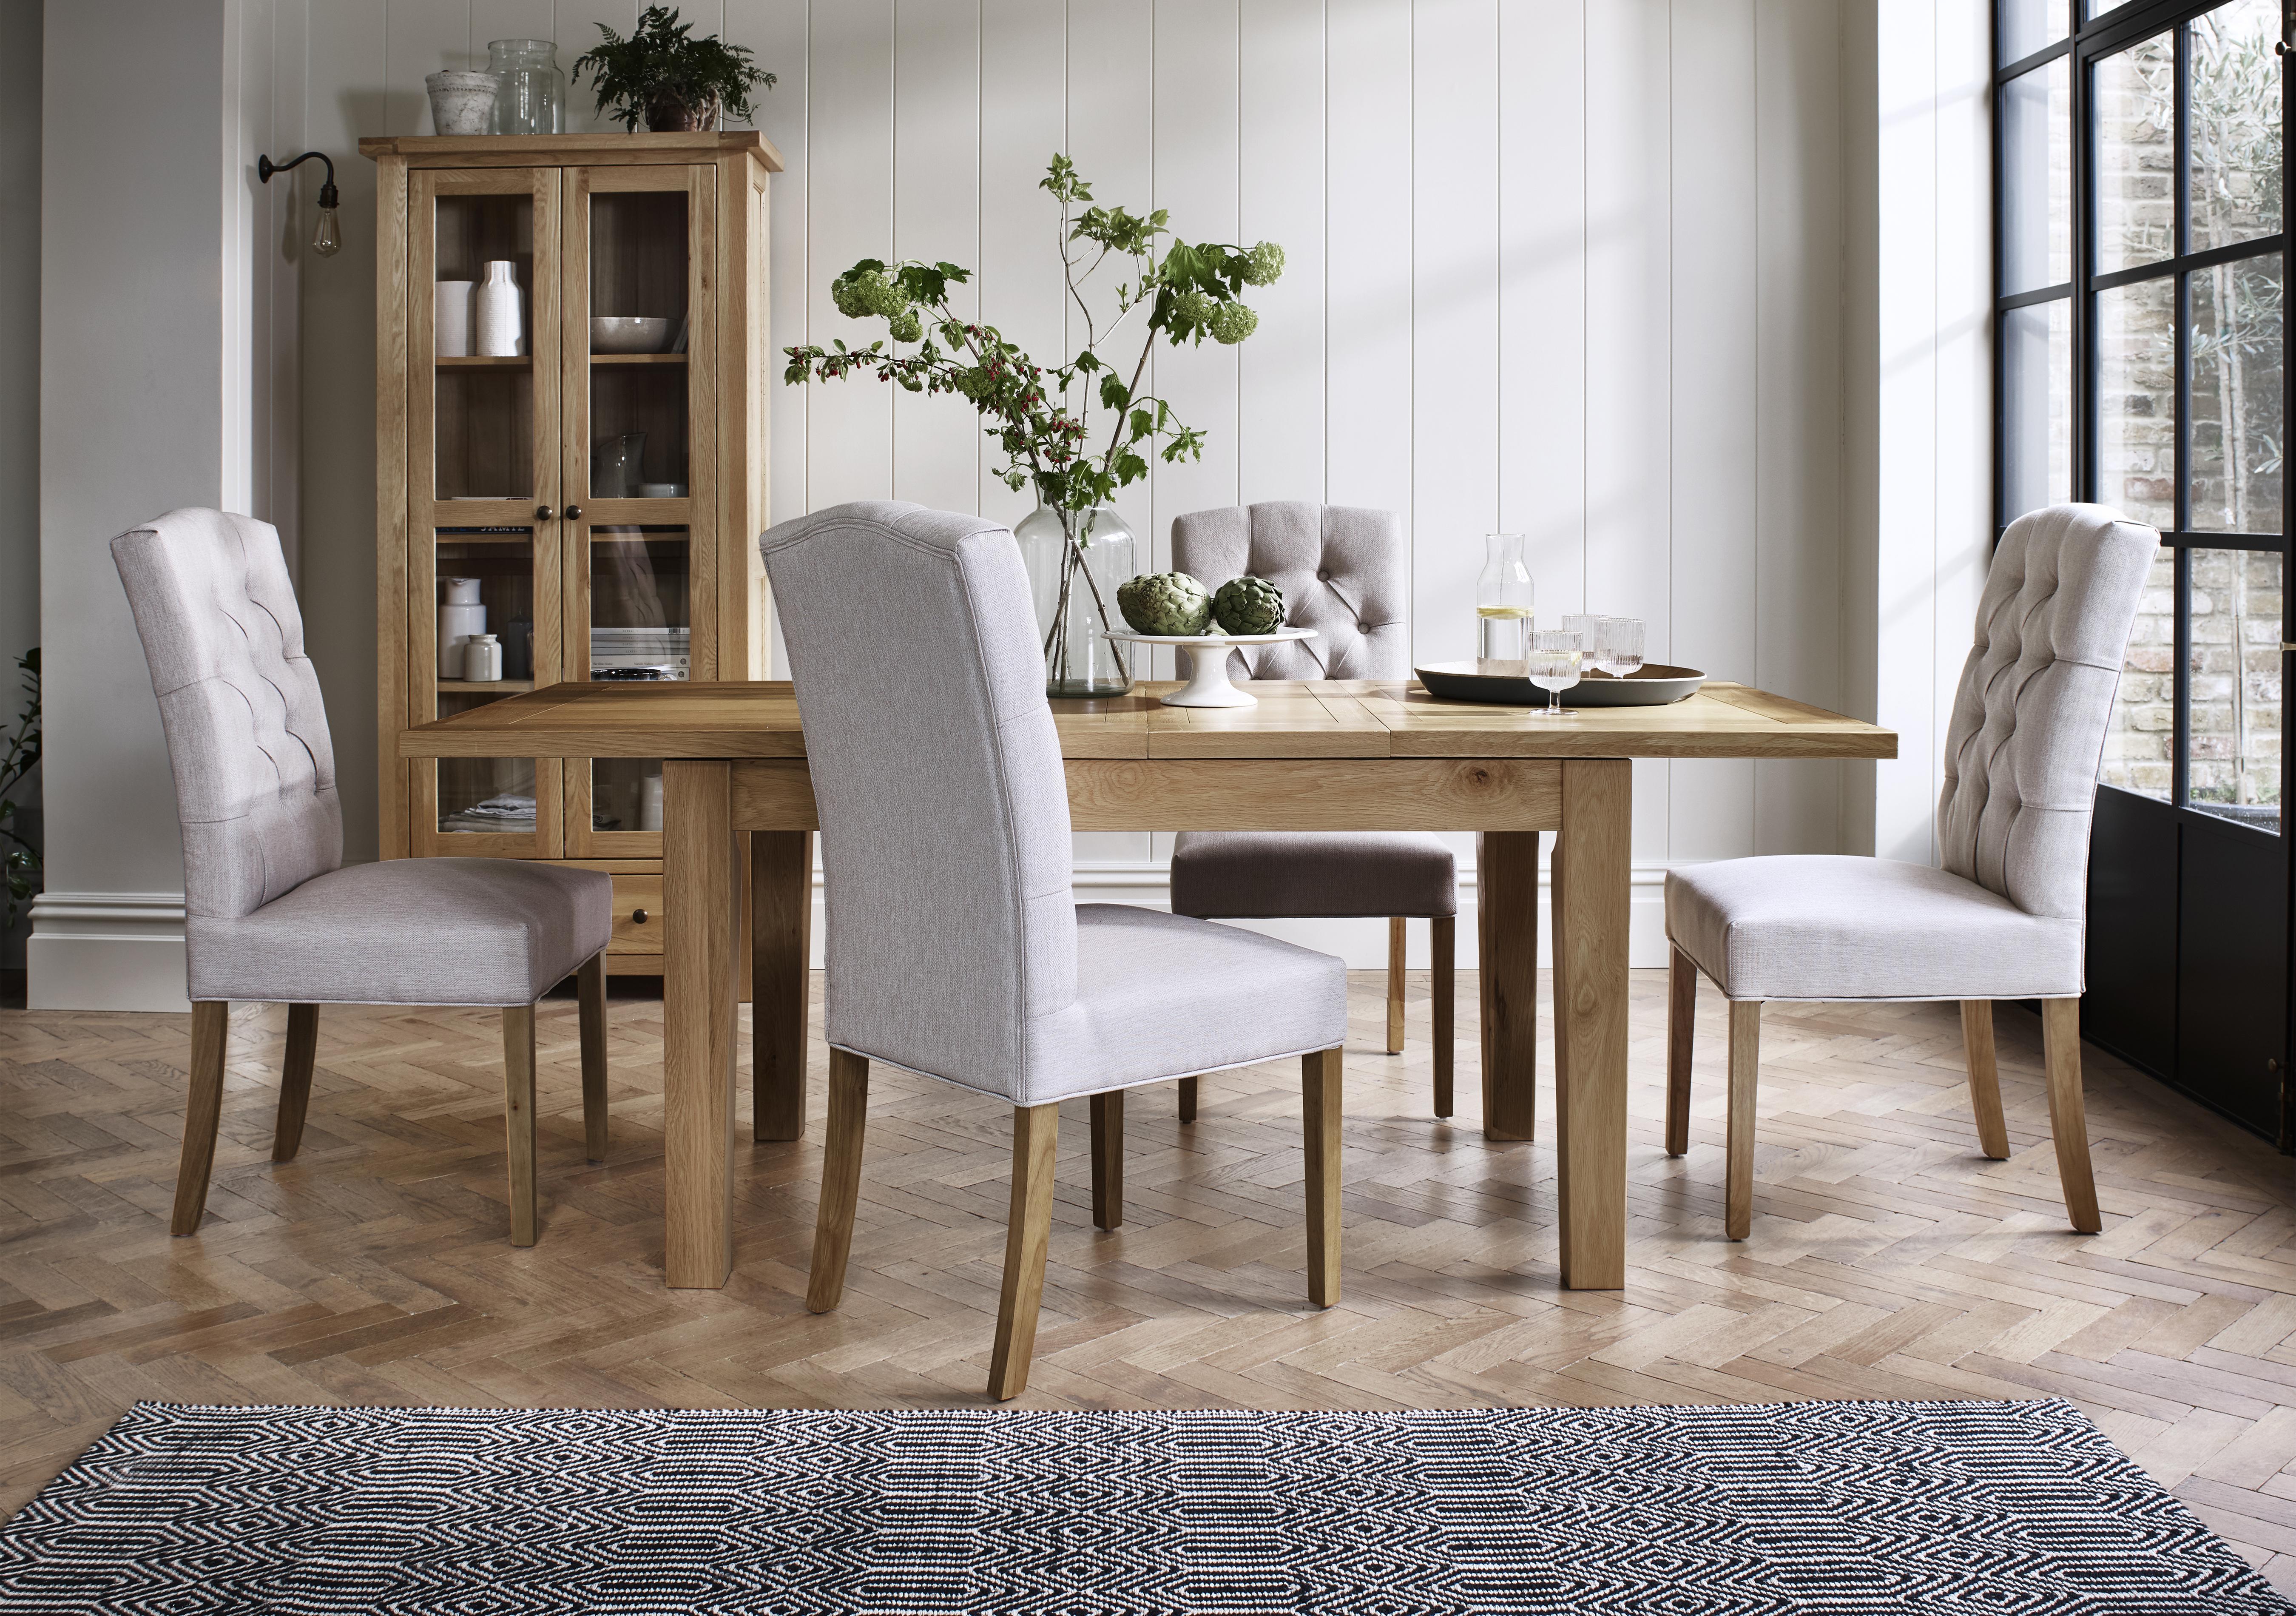 California Solid Oak Rectangular Extending Table and 4 Button Back Upholstered Chairs in  on Furniture Village